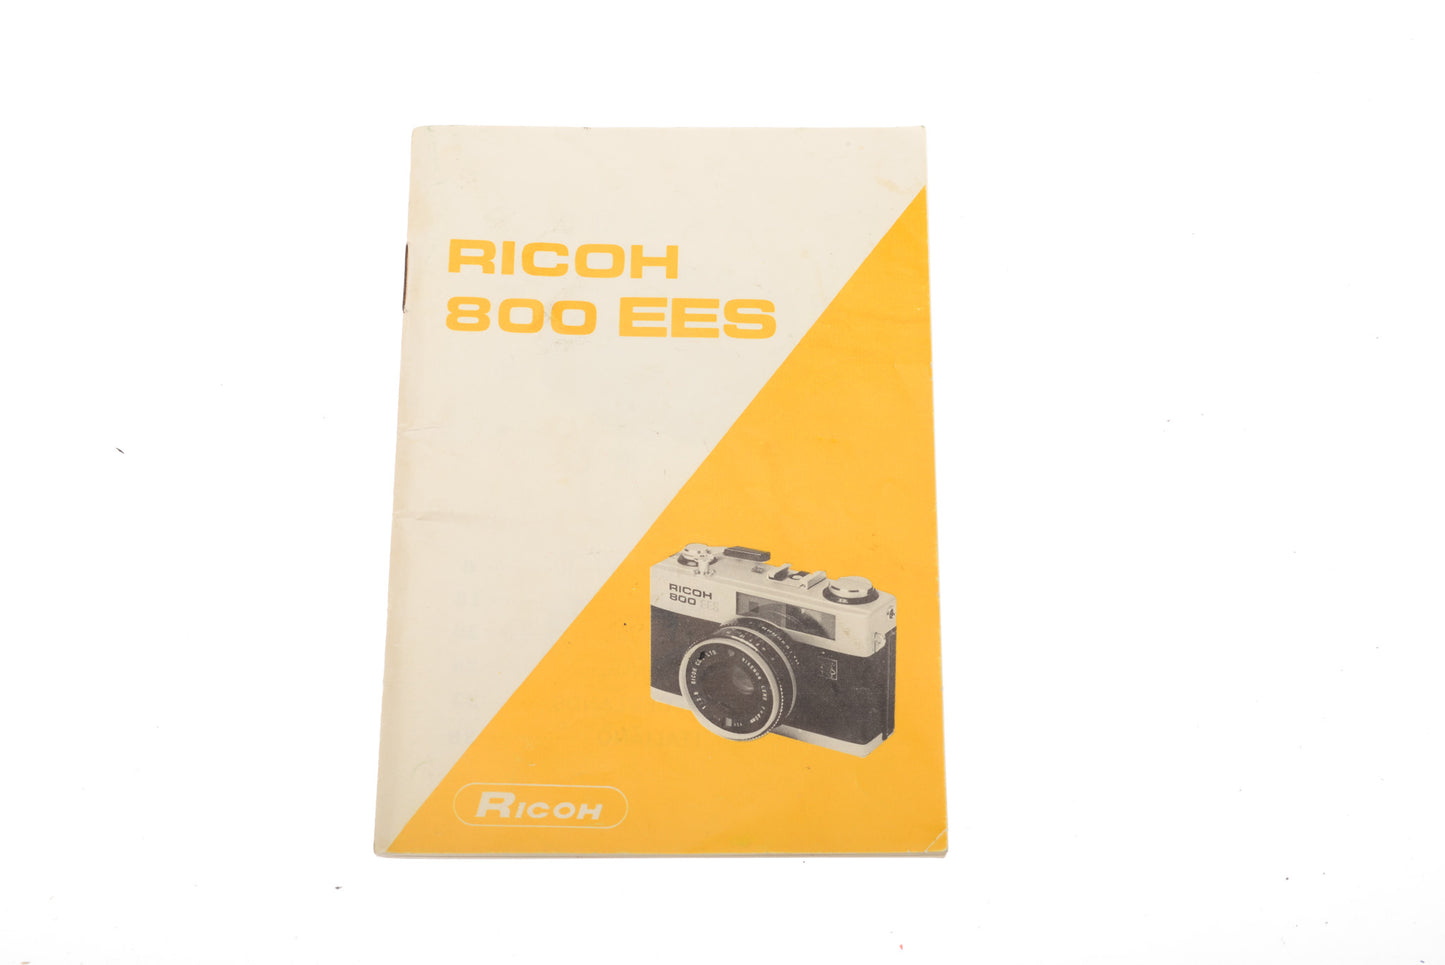 Ricoh 800 EES Instructions - Accessory